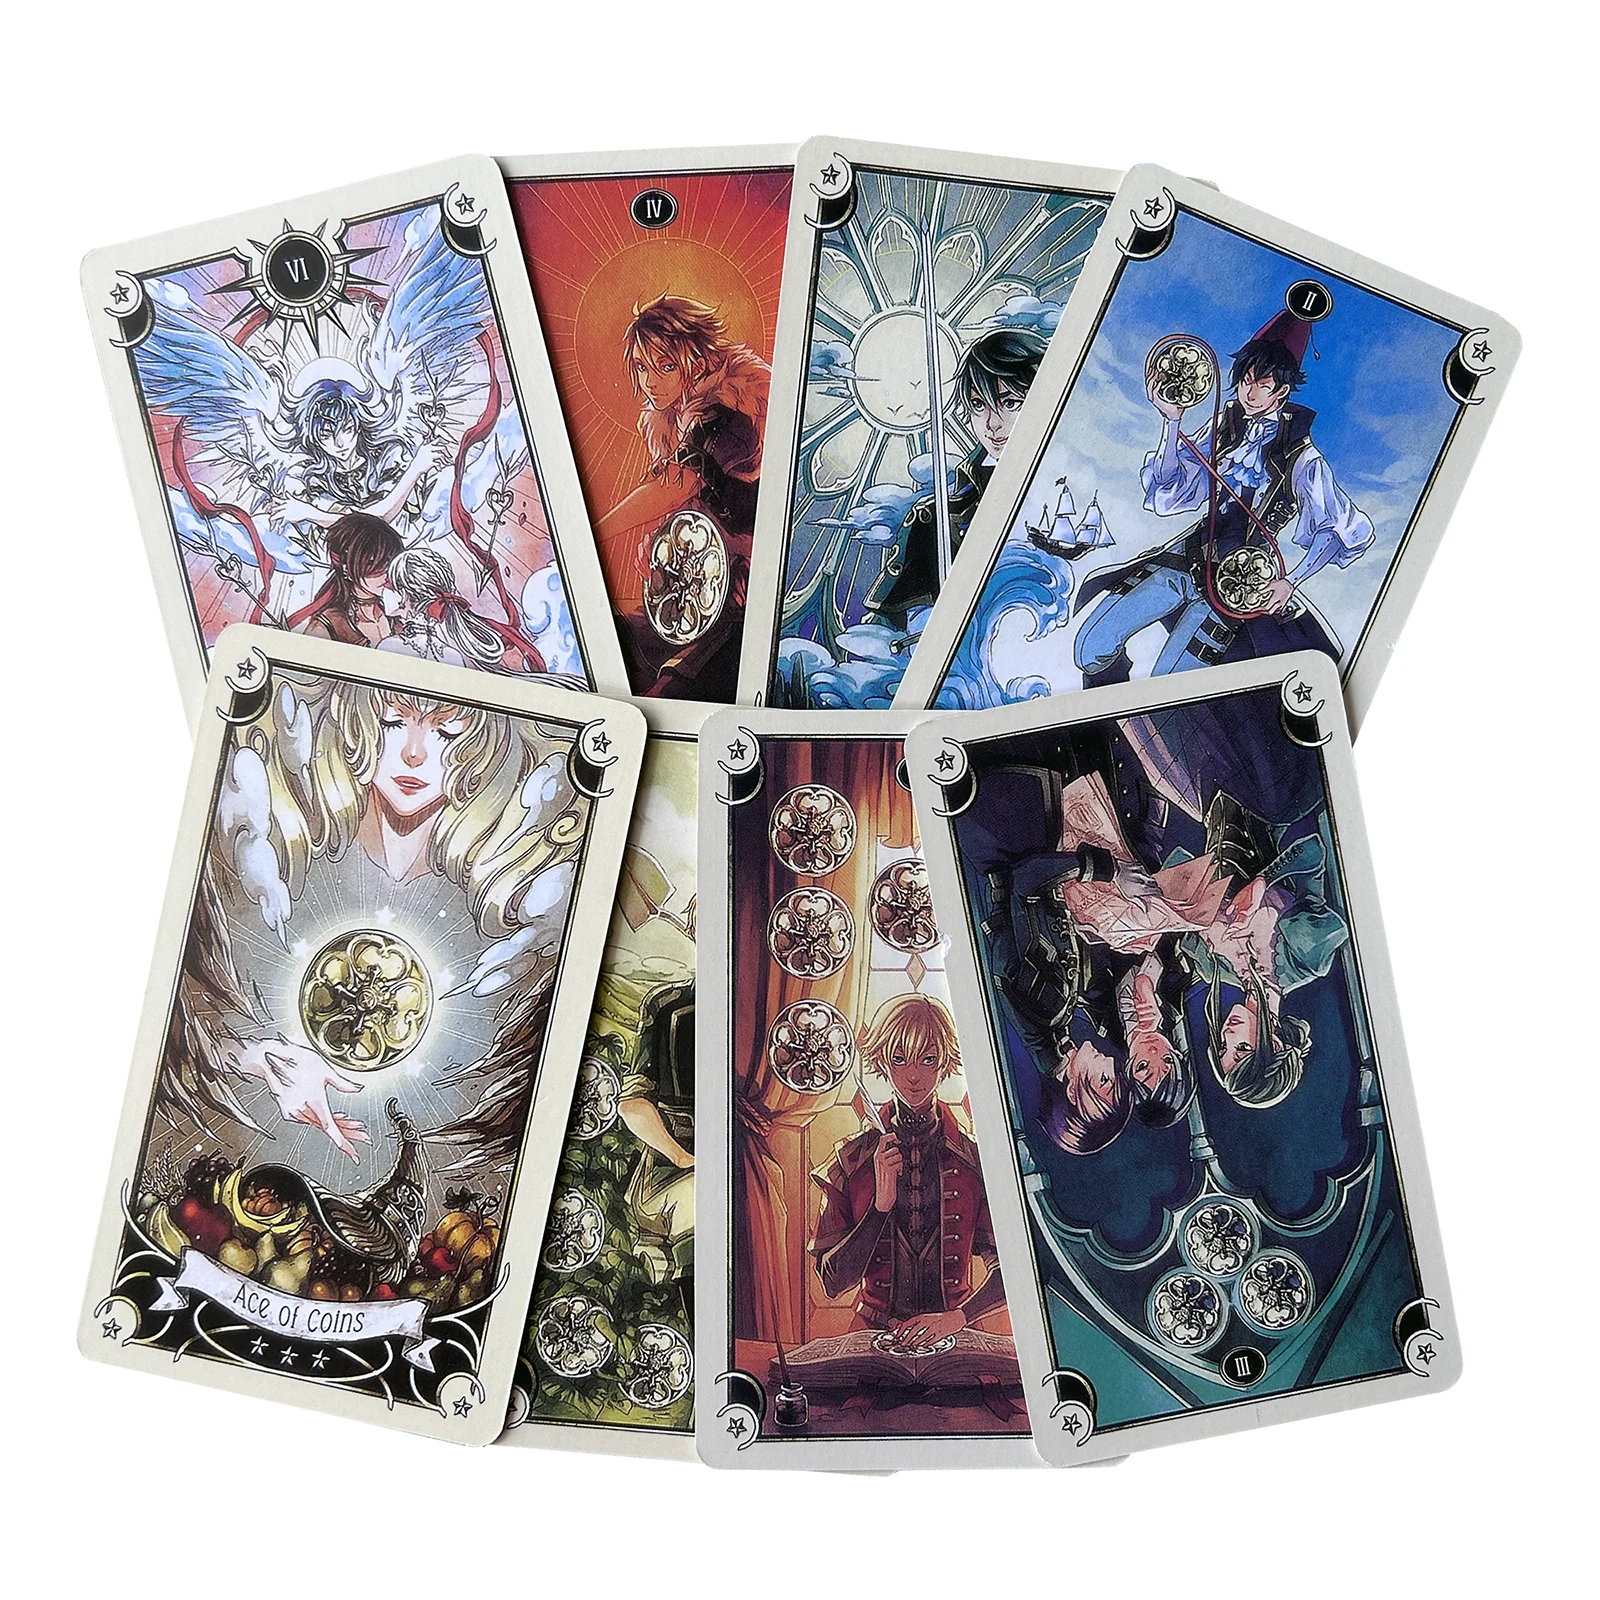 Hot Sell Tarot Cards 12x7 Board Game for Divination Personal Use Tarot Deck Party Games Full English Table Game Outdoor Camping. hot sell oracle card decks 12x8 board game for divination personal use tarot deck party games full english tarot cards